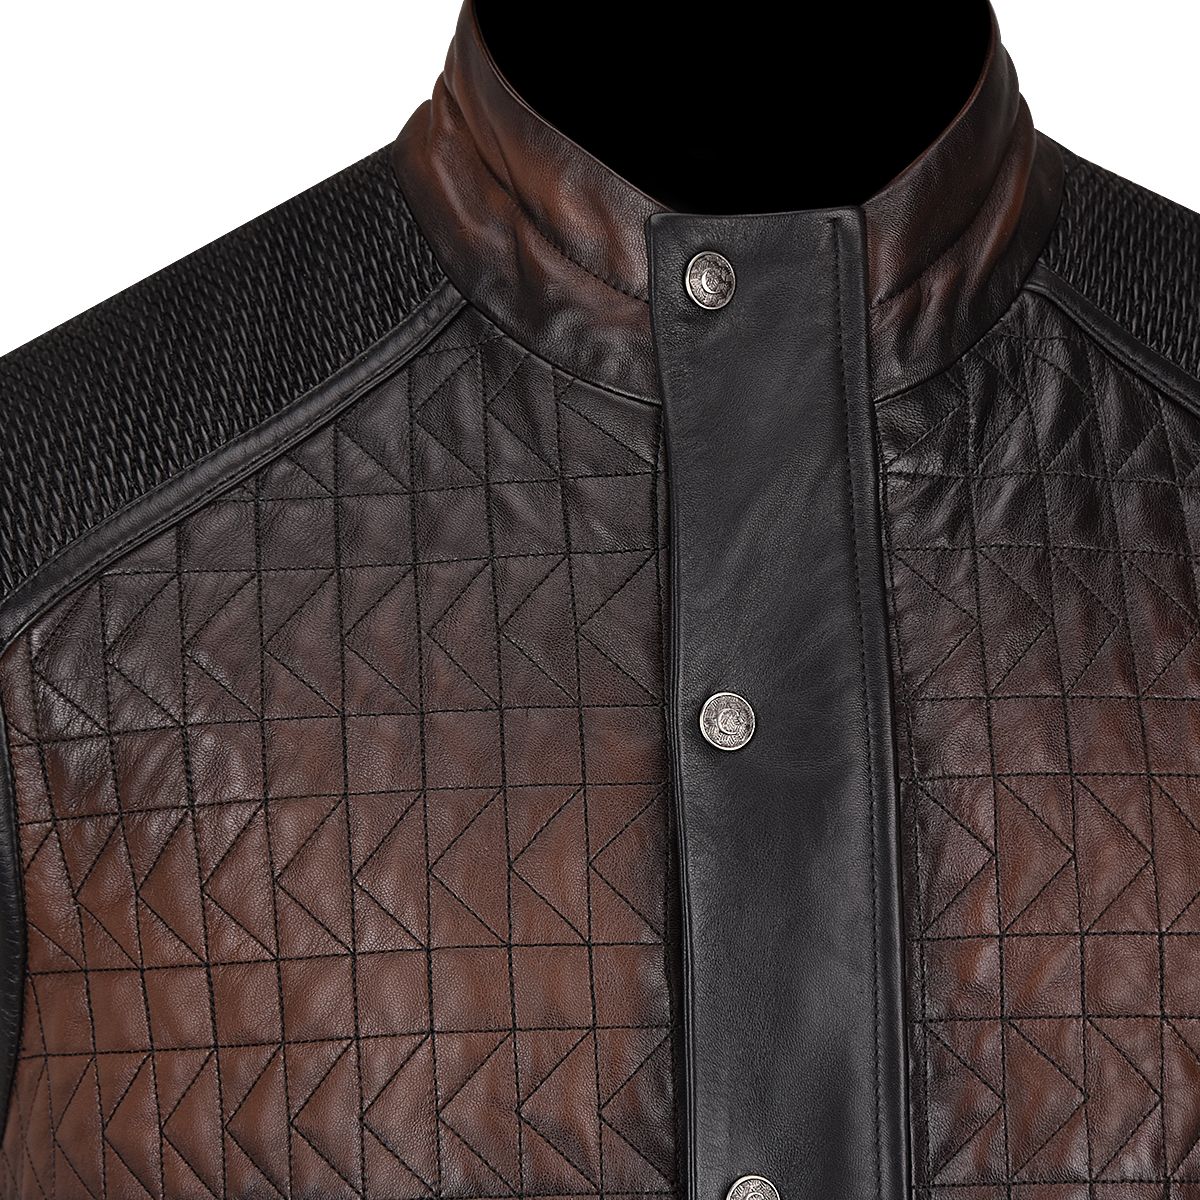 H295COB- Cuadra black and brown casual lambskin leather quilted vest for men-Kuet.us - Cuadra Boots - Western Cowboy, Casual Fashion and Dress Boots